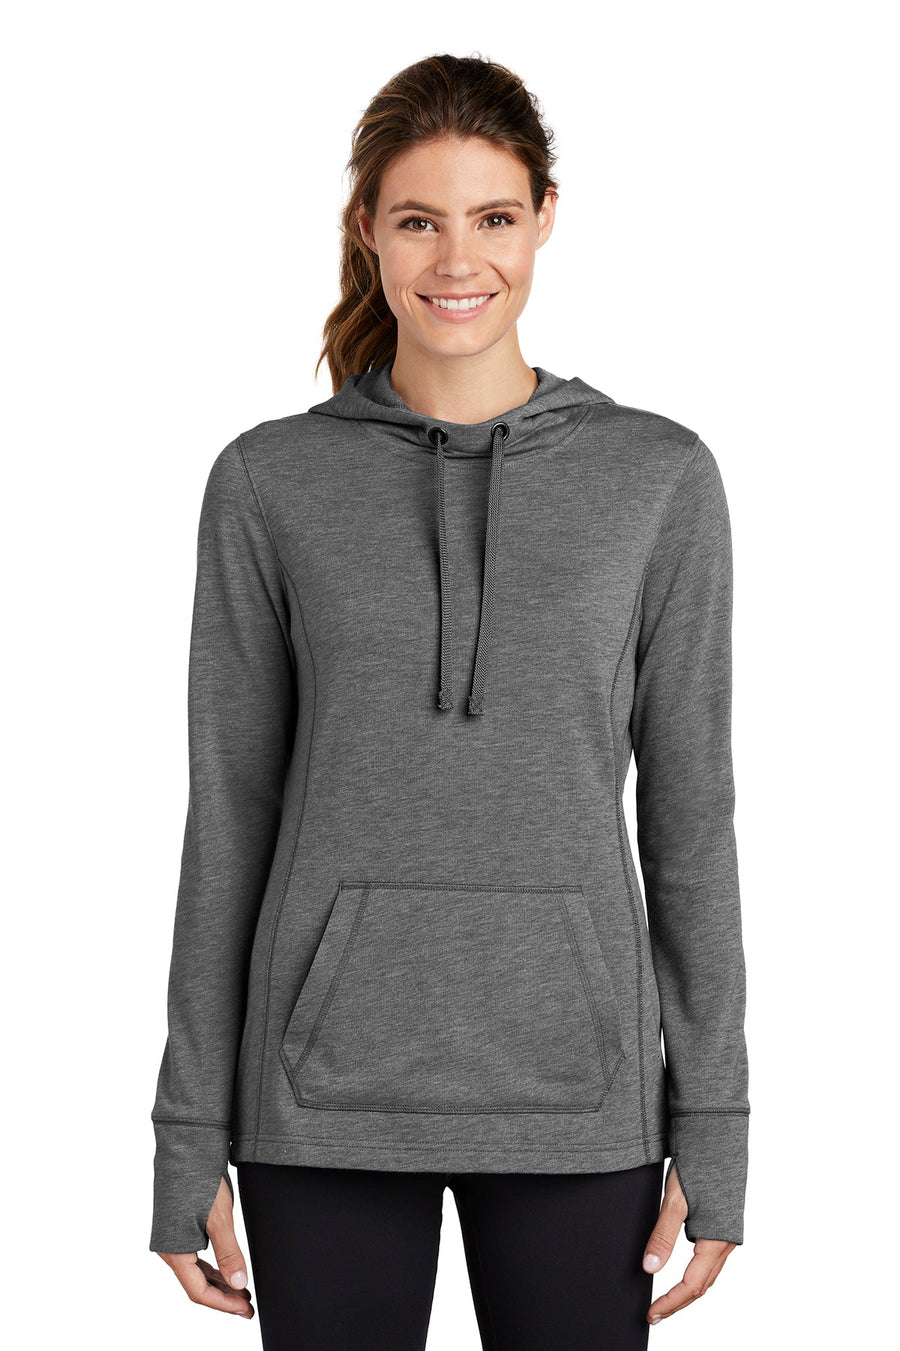 Women's Tri-Blend Wicking Fleece Hooded Pullover - Clay Soccer